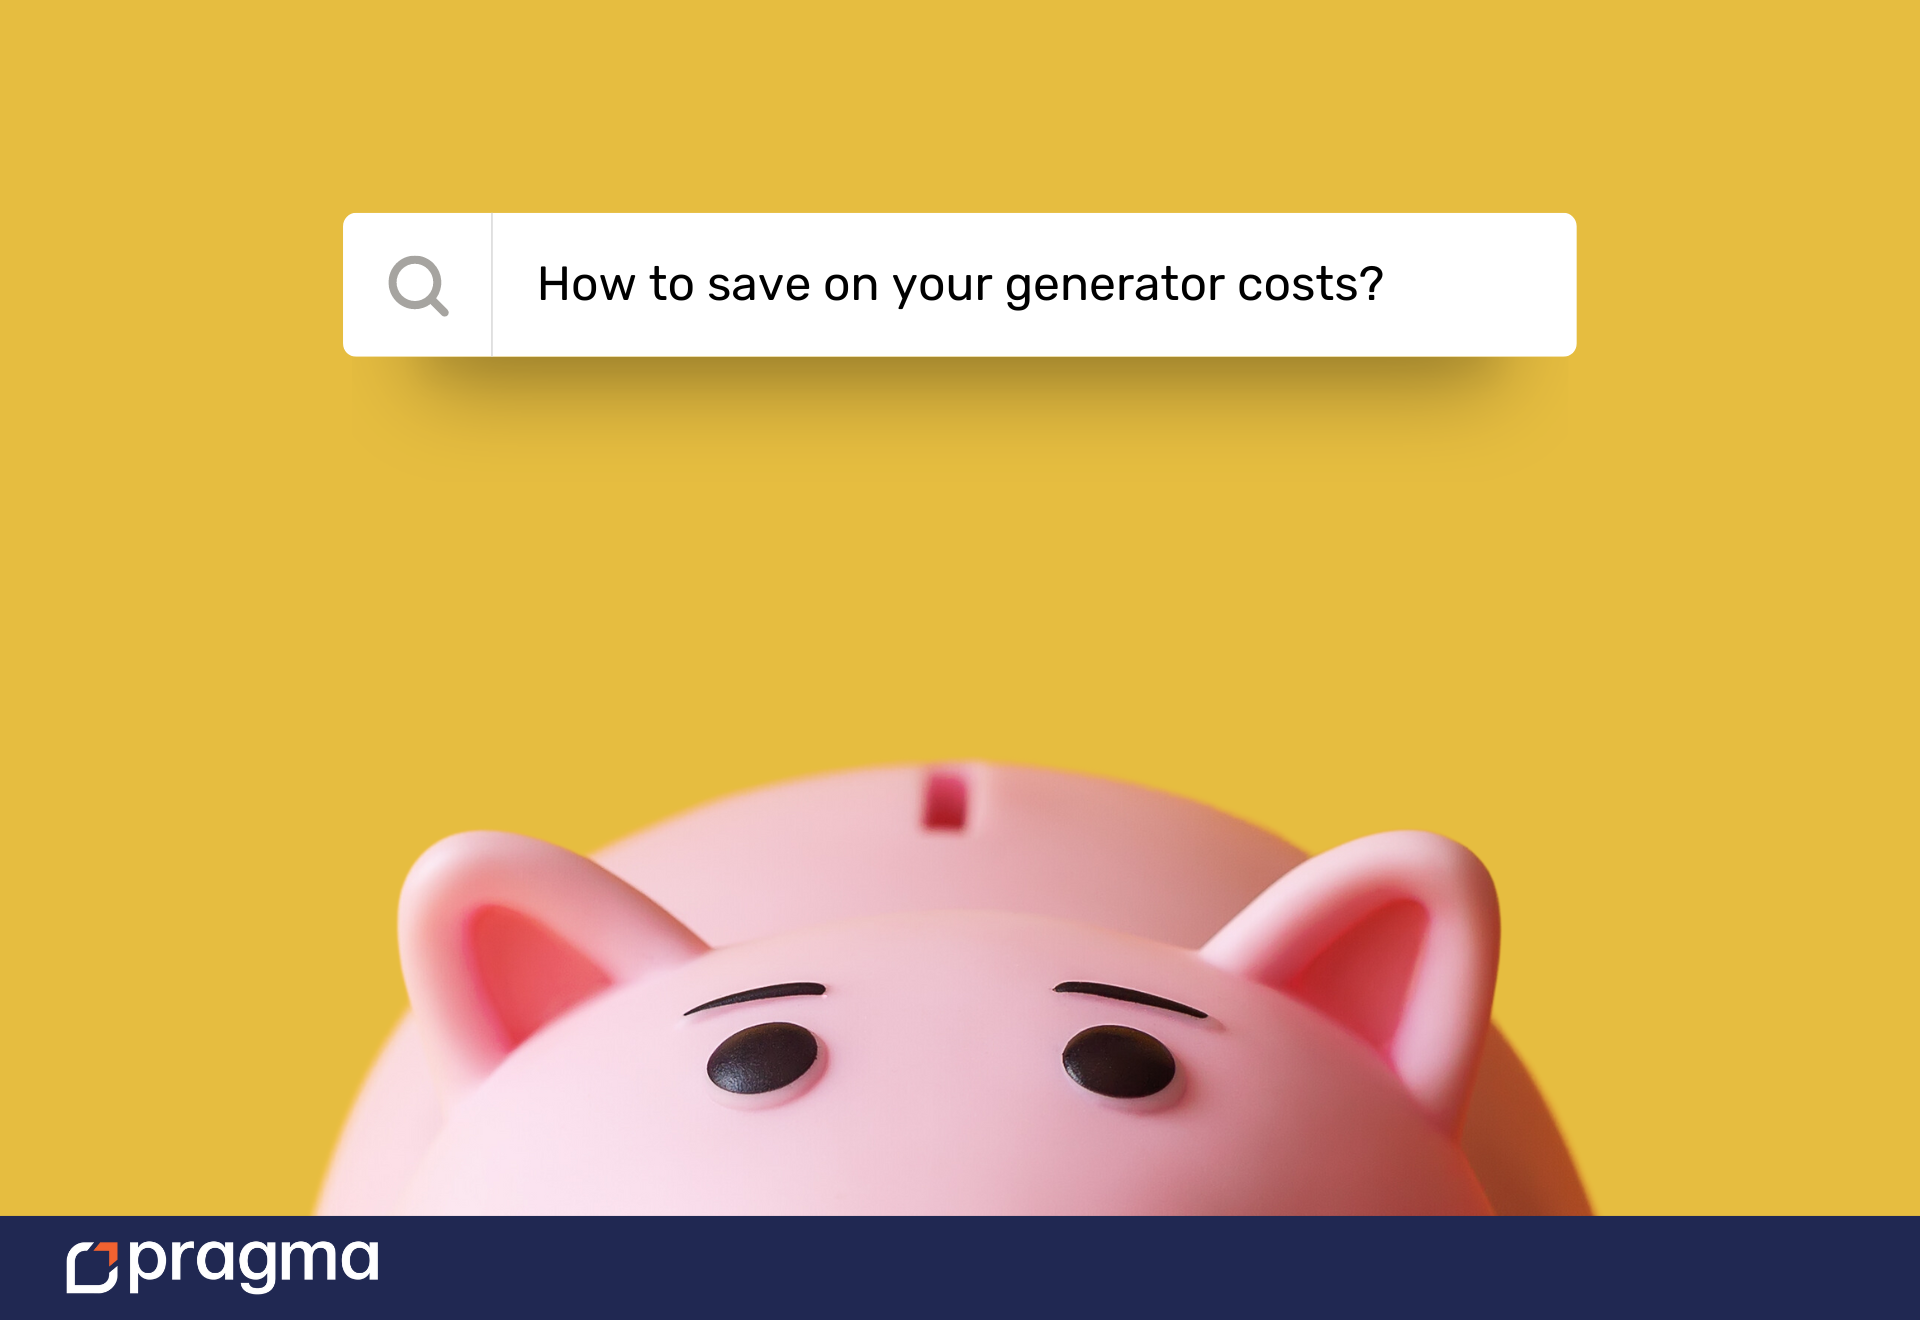 How to save money on generator costs